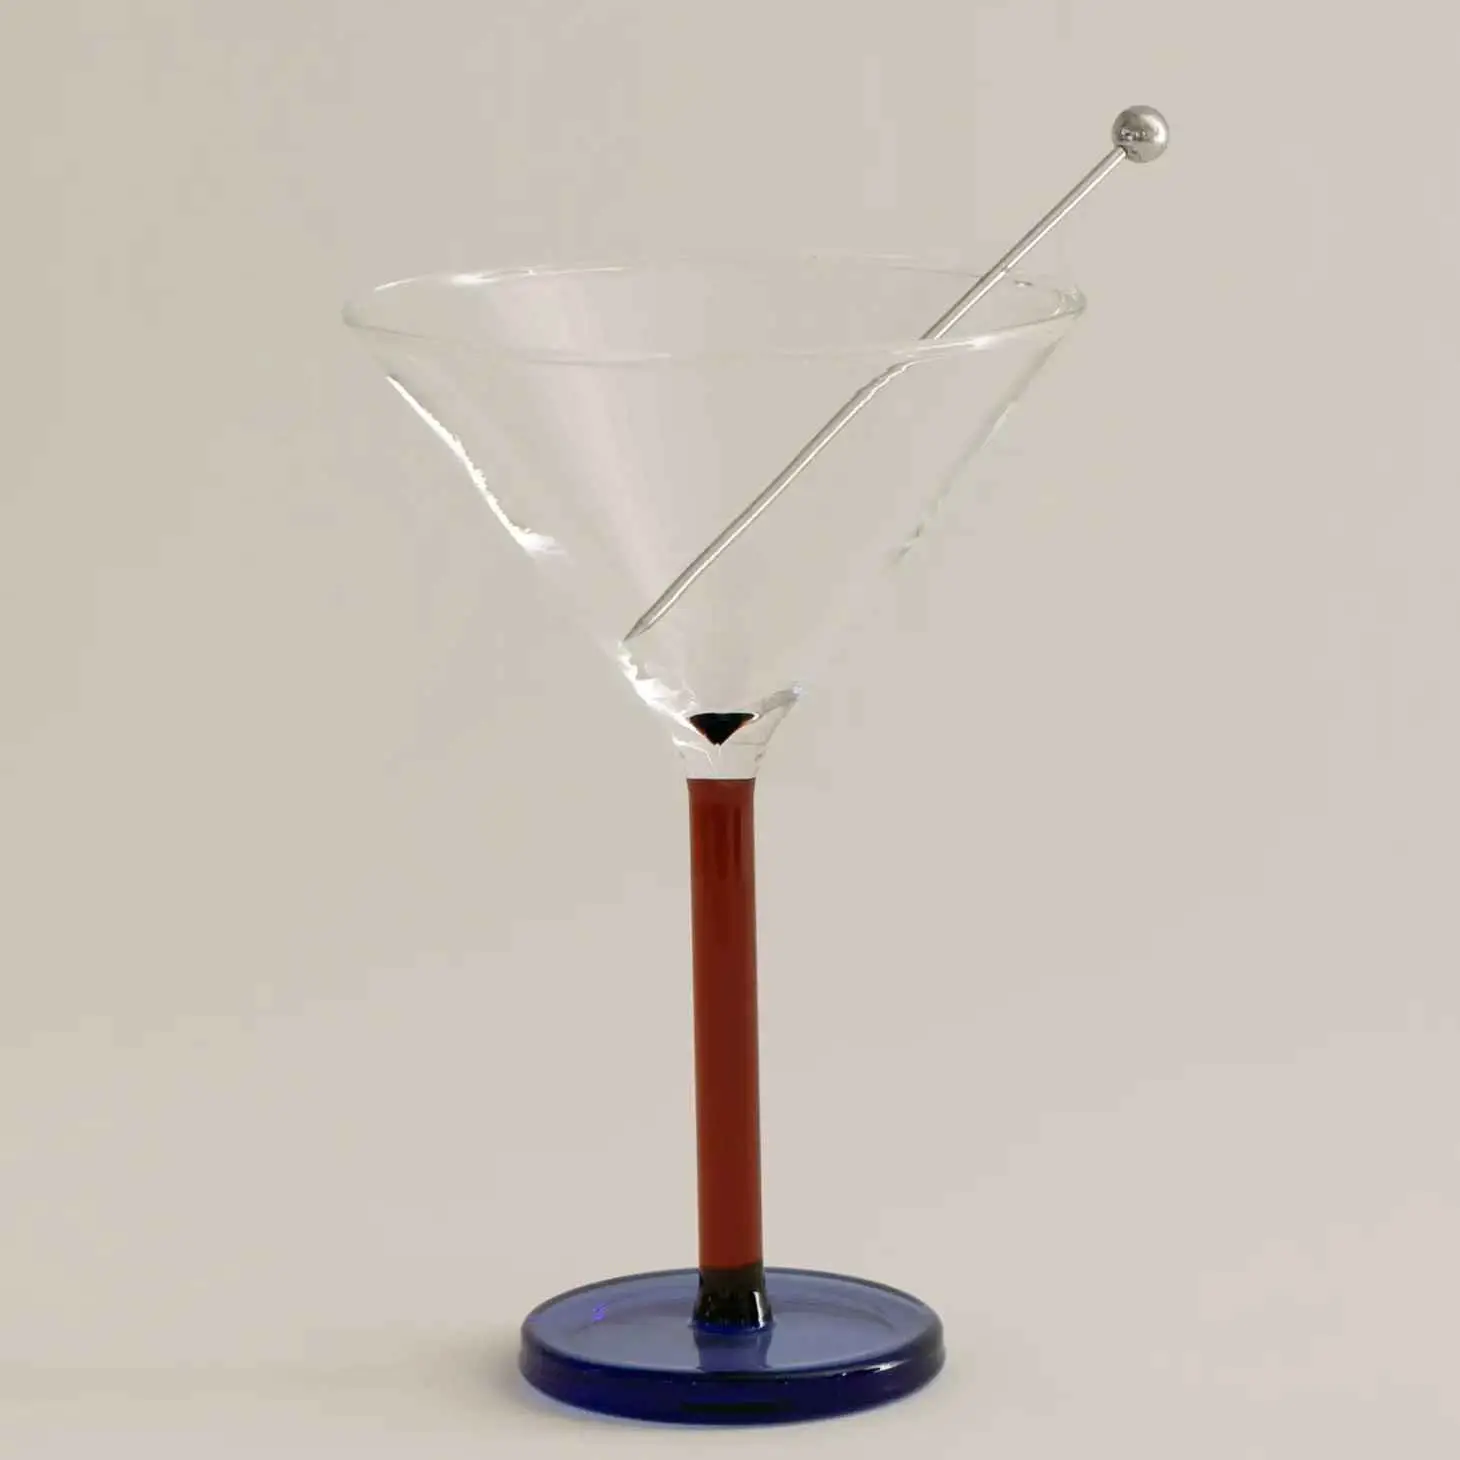 Piano Cocktail Glasses - Dizzy Delivery